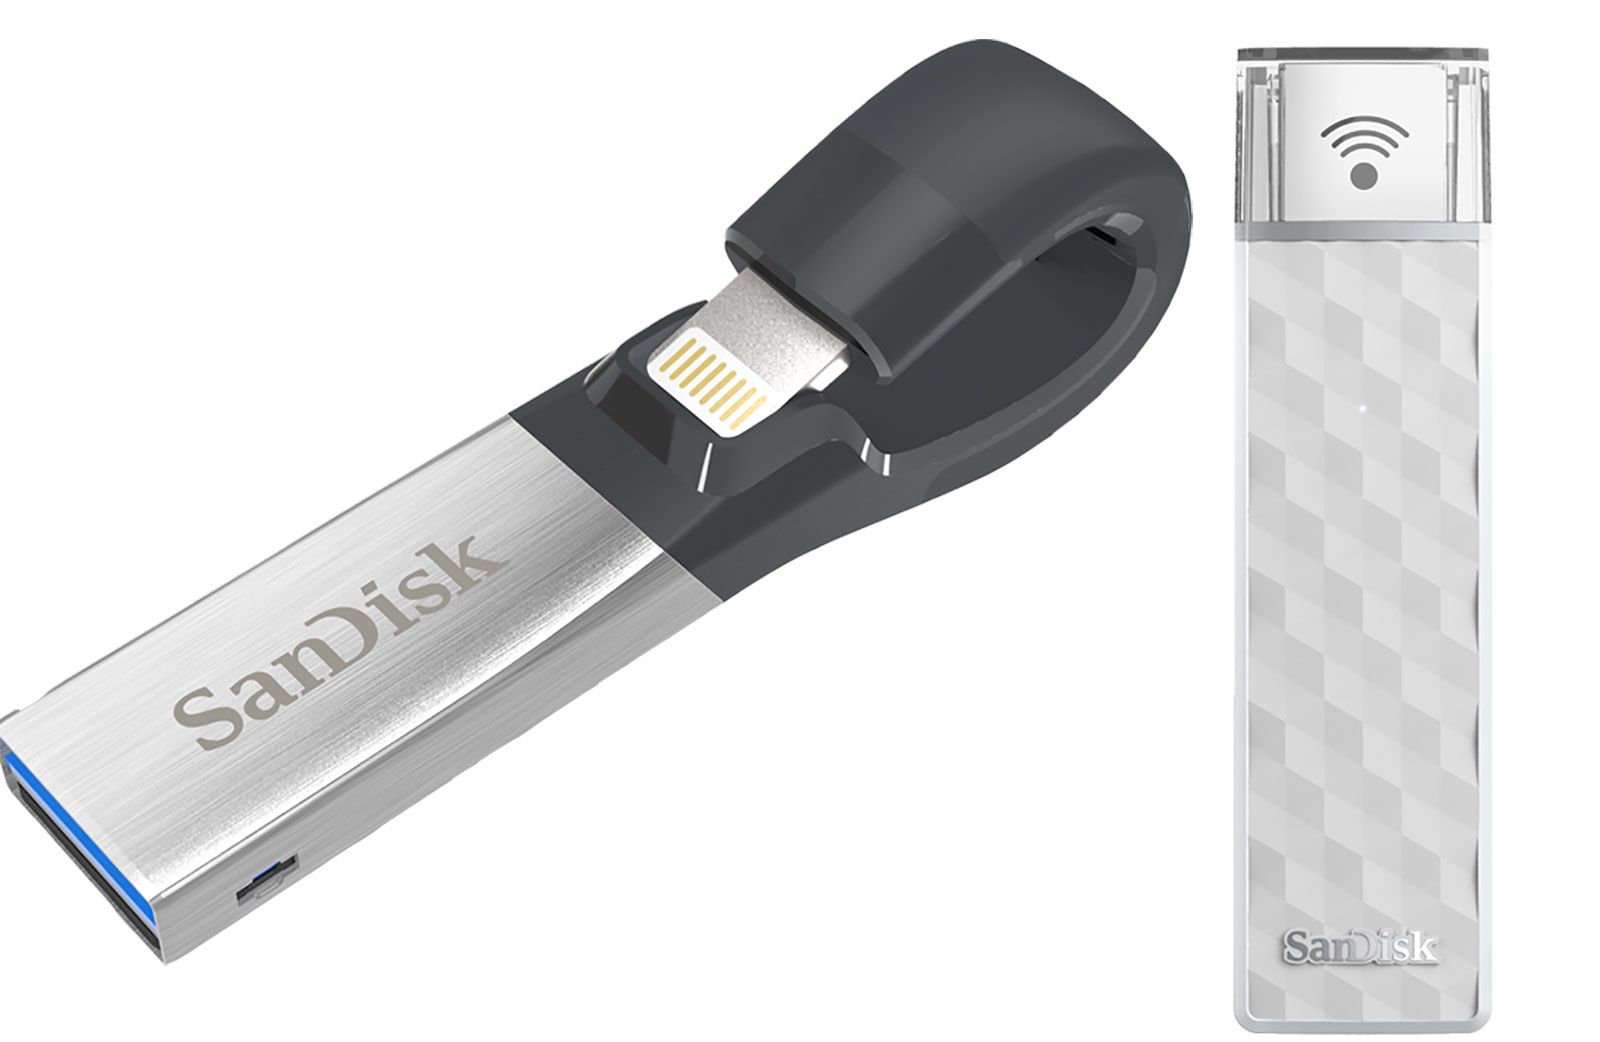 sandisk will now let you upgrade your ios device with 256gb of storage image 1